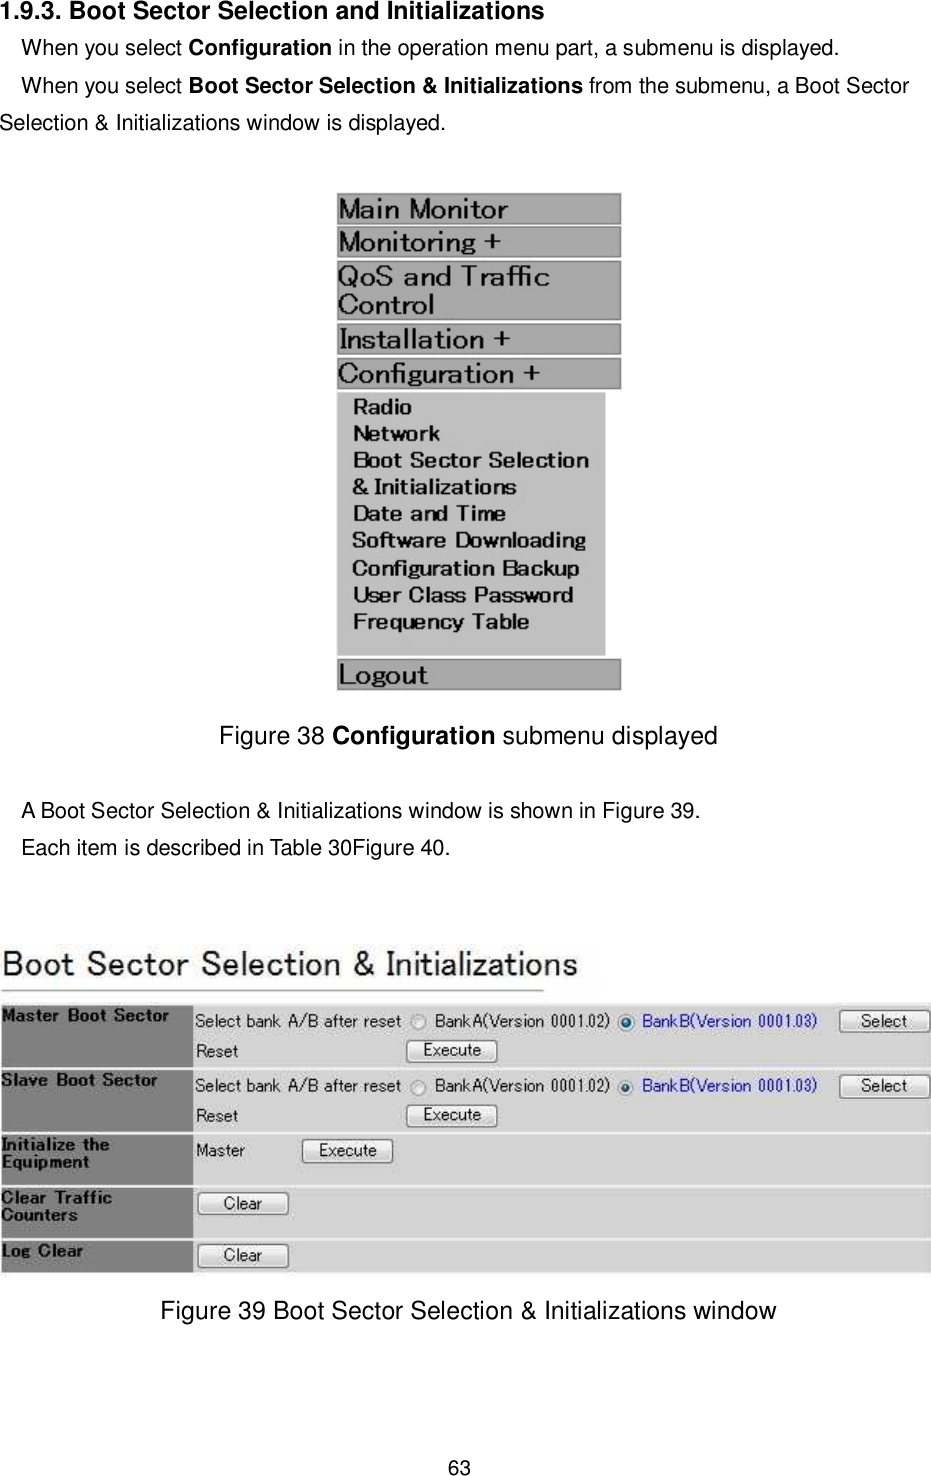    63  1.9.3. Boot Sector Selection and Initializations When you select Configuration in the operation menu part, a submenu is displayed. When you select Boot Sector Selection &amp; Initializations from the submenu, a Boot Sector Selection &amp; Initializations window is displayed.   Figure 38 Configuration submenu displayed  A Boot Sector Selection &amp; Initializations window is shown in Figure 39. Each item is described in Table 30Figure 40.    Figure 39 Boot Sector Selection &amp; Initializations window  